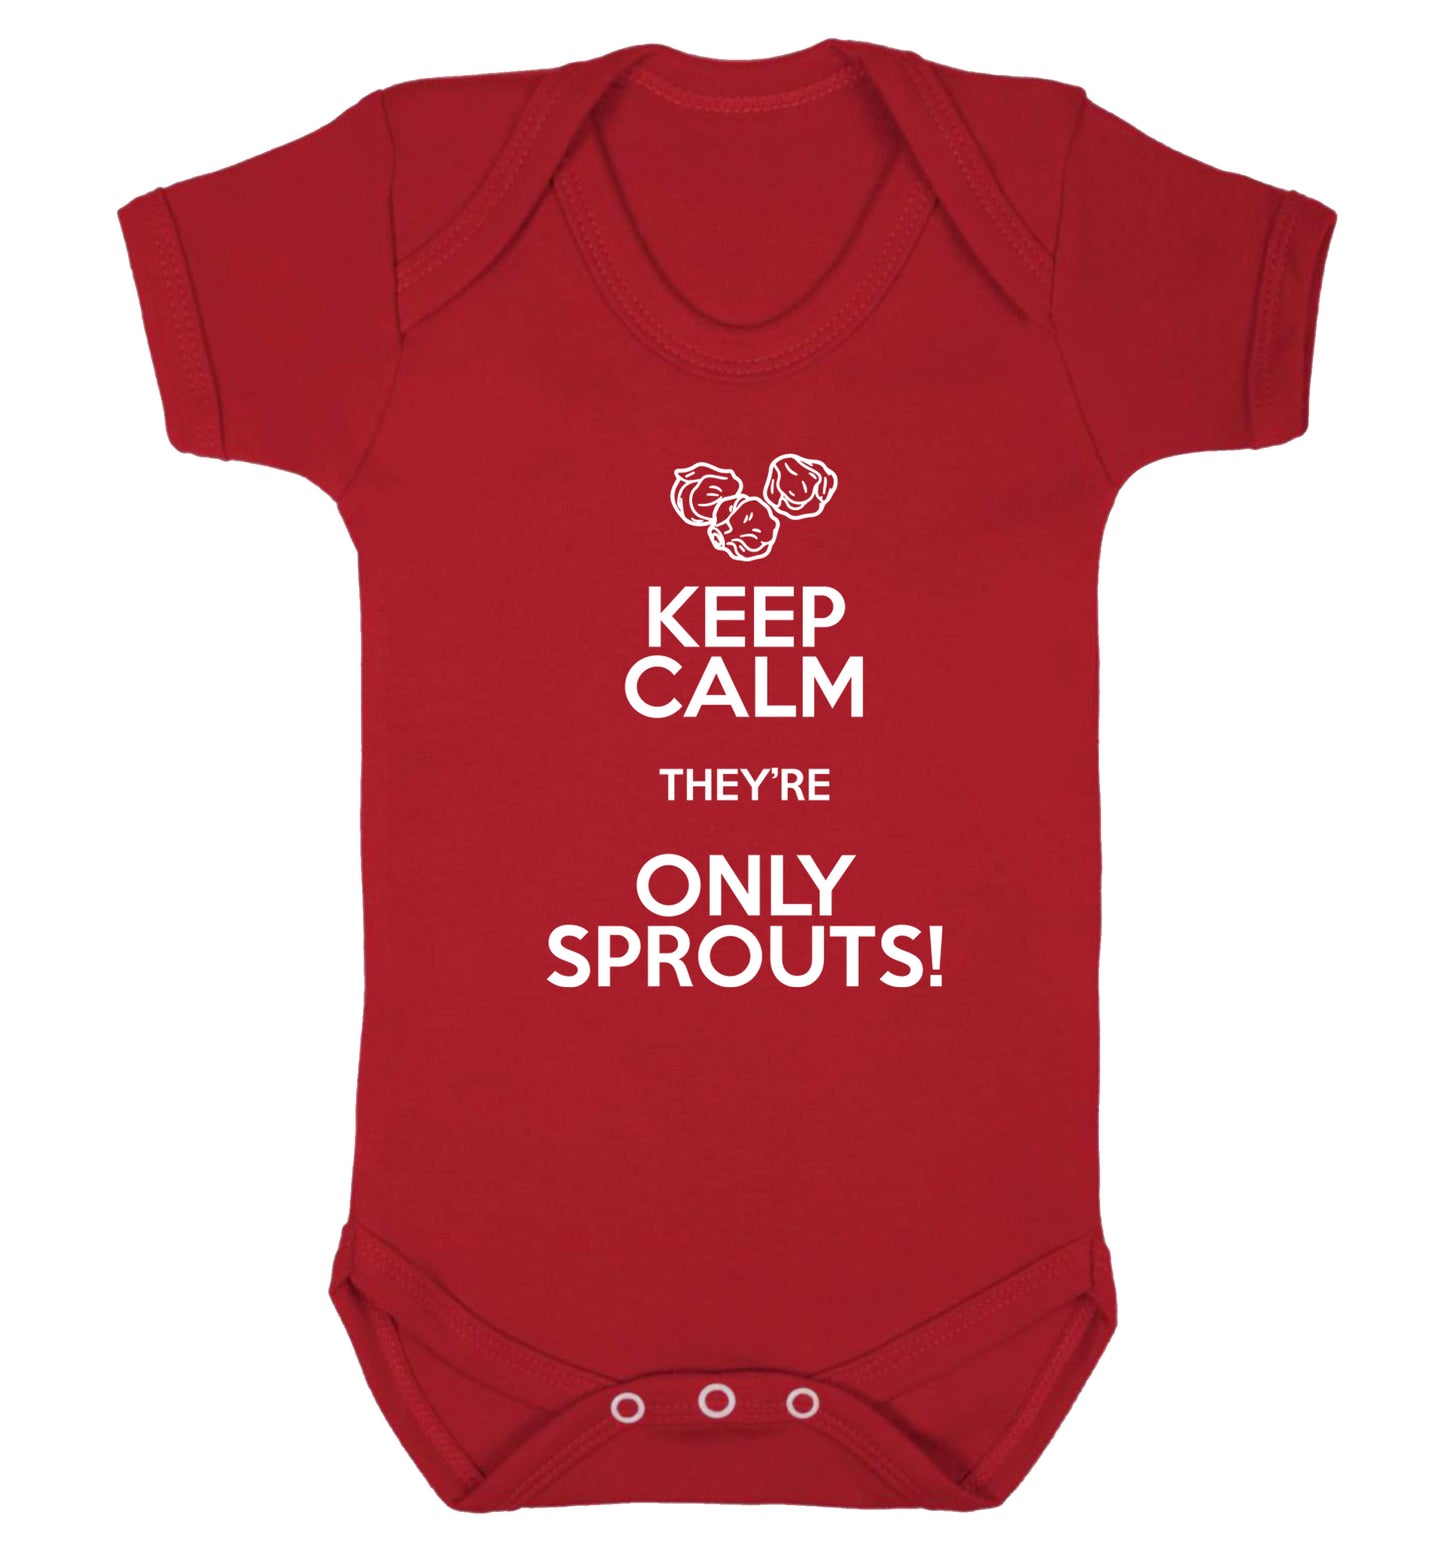 Keep calm they're only sprouts Baby Vest red 18-24 months